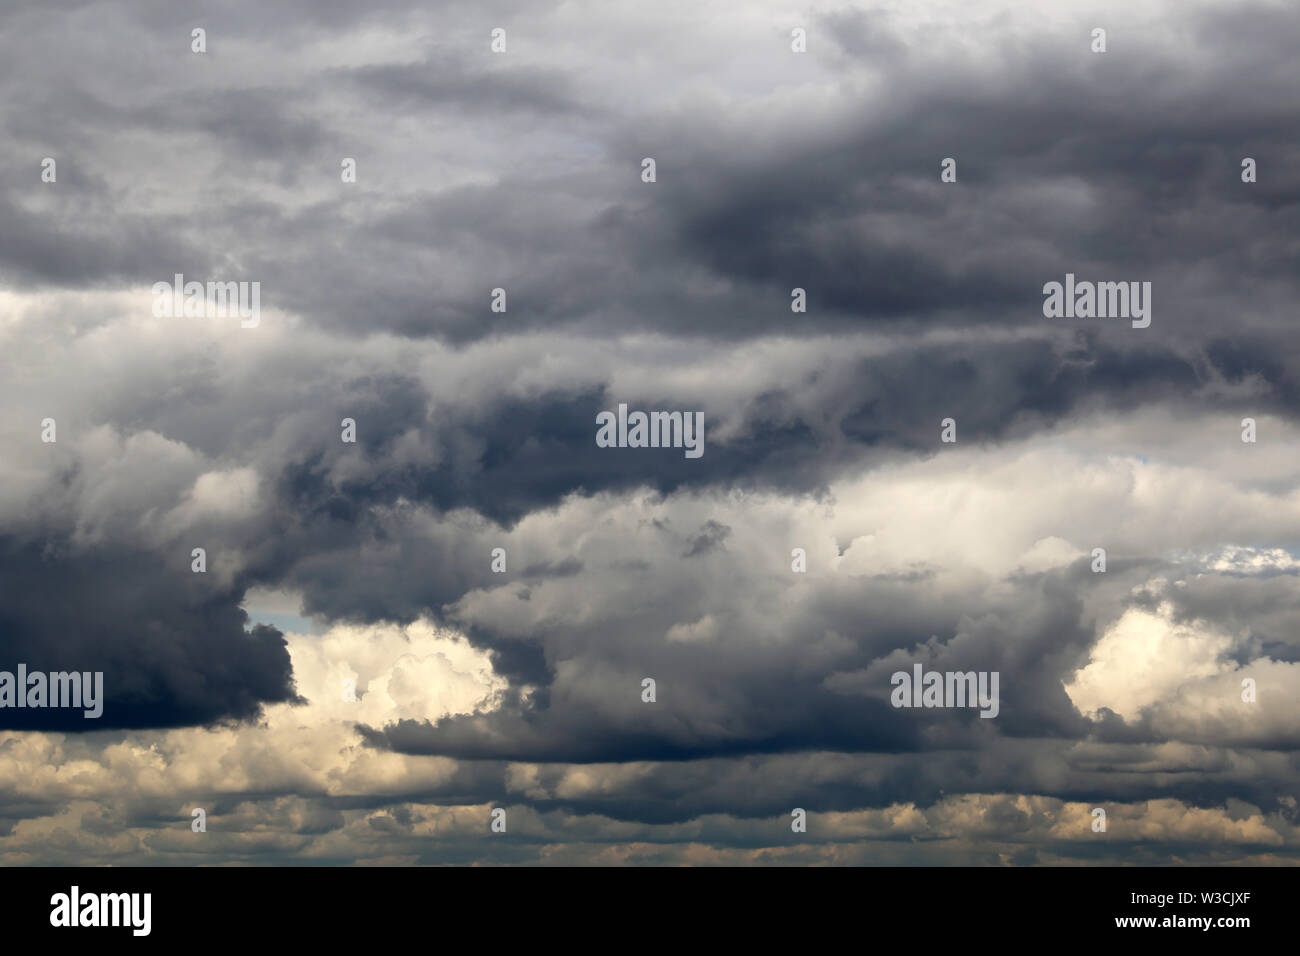 Storm Sky Covered With Dark Cumulus Clouds Before The Rain Dark Cloudy Sky Overcast Day Beautiful Dramatic Background For Rainy Weather Stock Photo Alamy